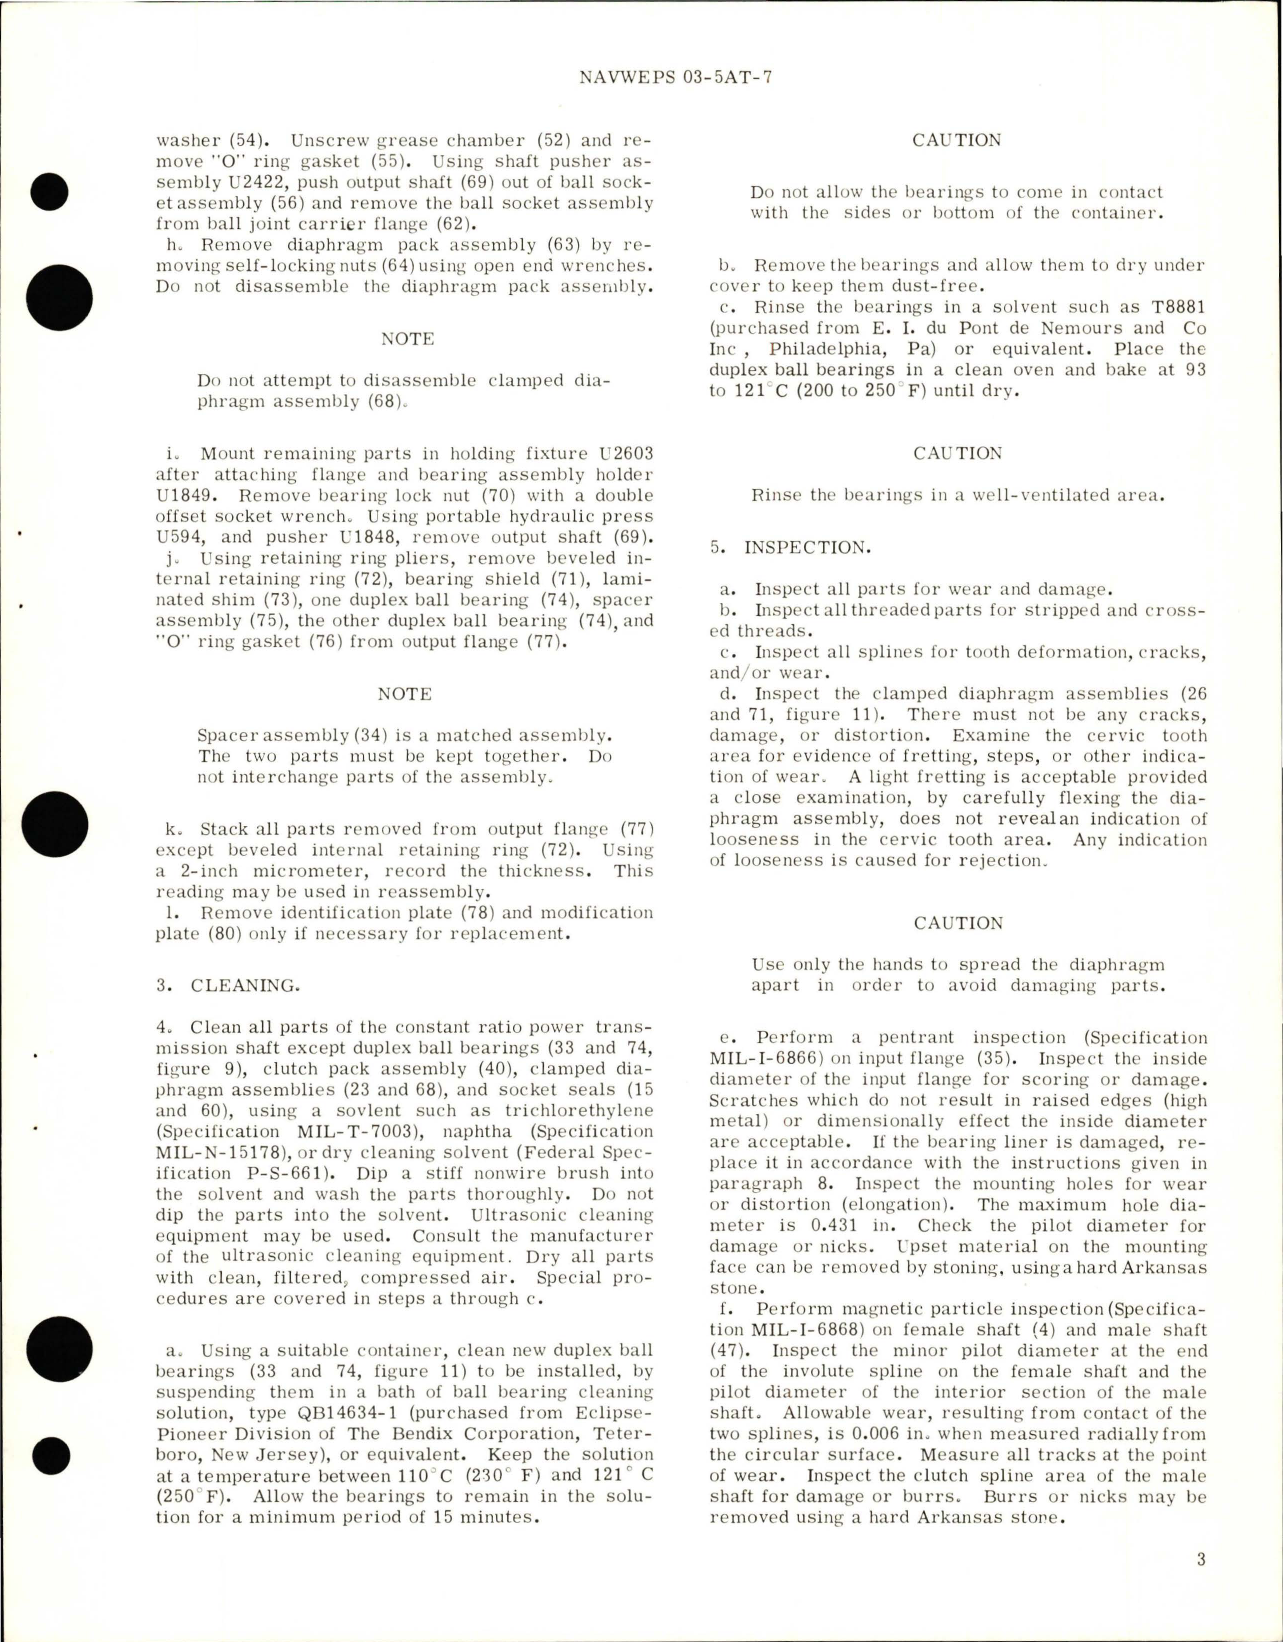 Sample page 5 from AirCorps Library document: Overhaul Instructions with Parts Breakdown for Constant Ratio Power Transmission Shaft - Part 19E29-3-C, -D, -E, -F, -G 